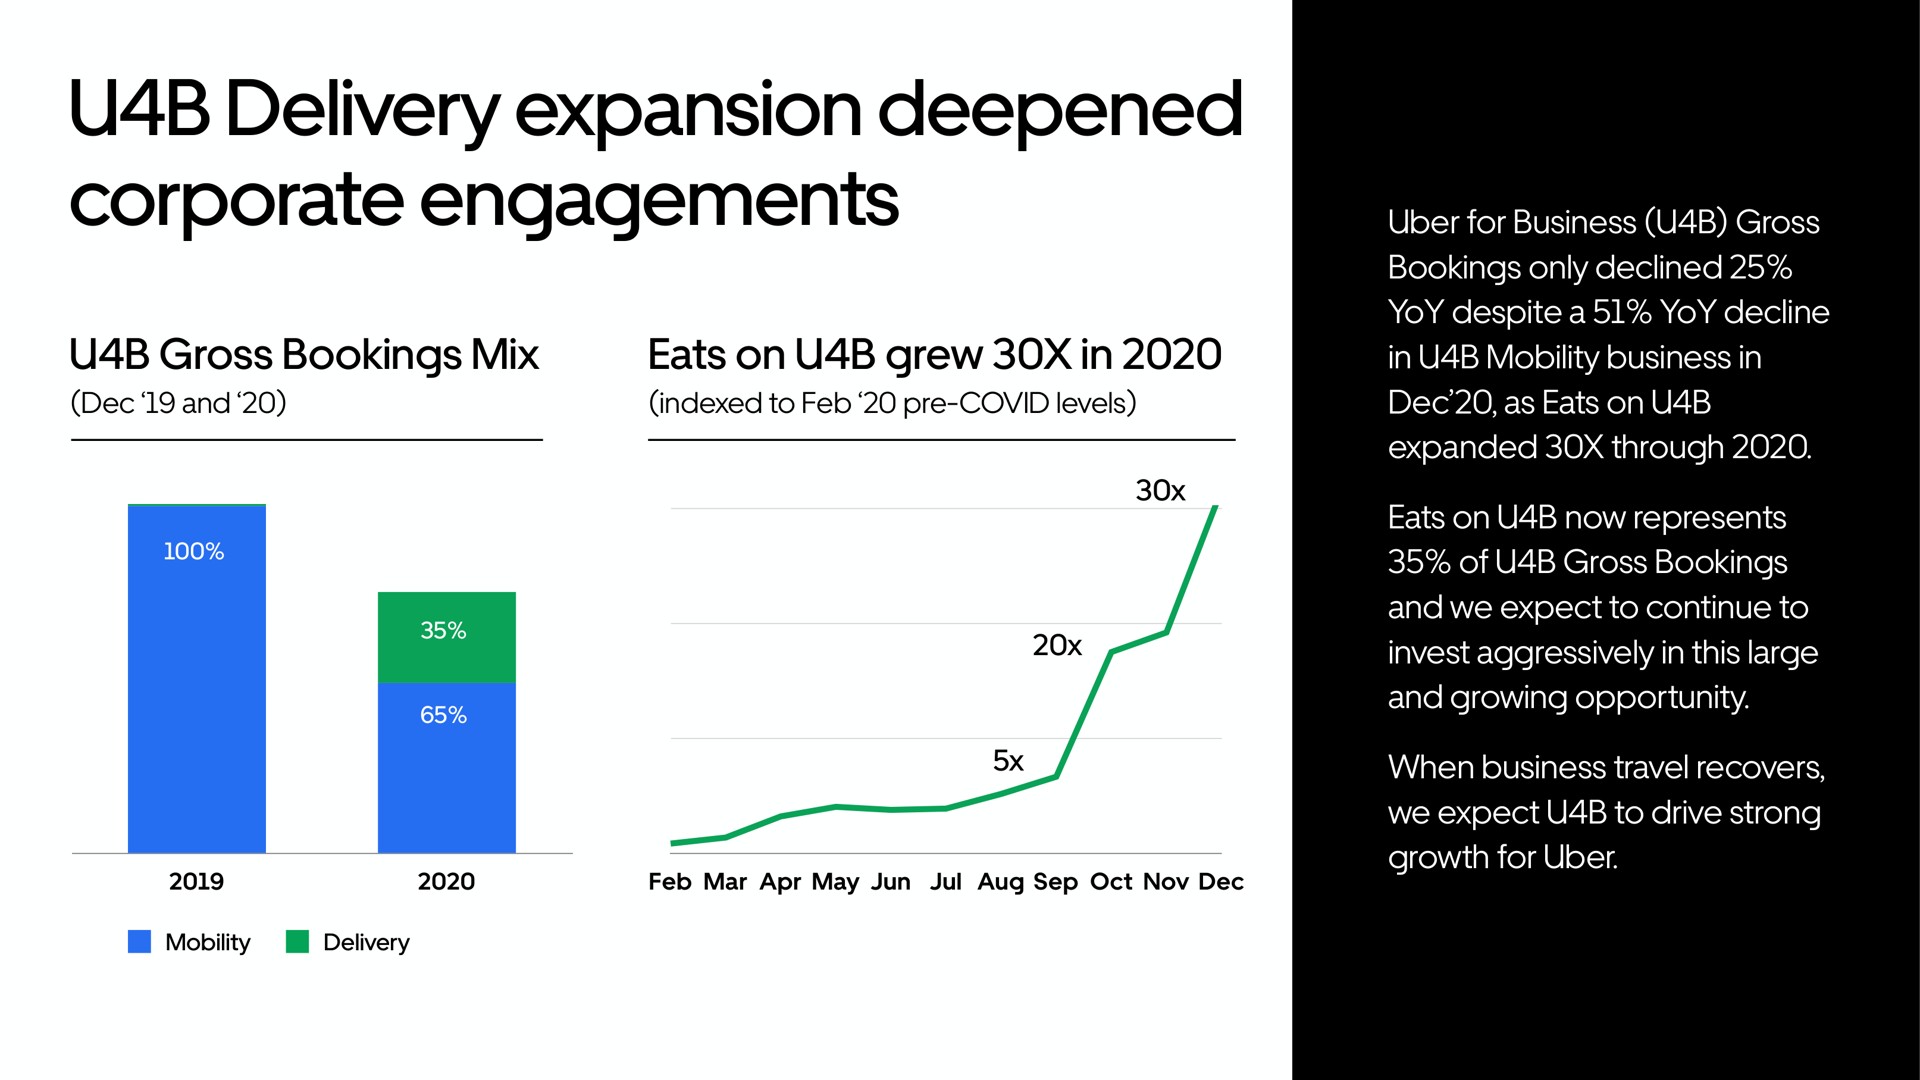 delivery expansion deepened corporate engagements | Uber